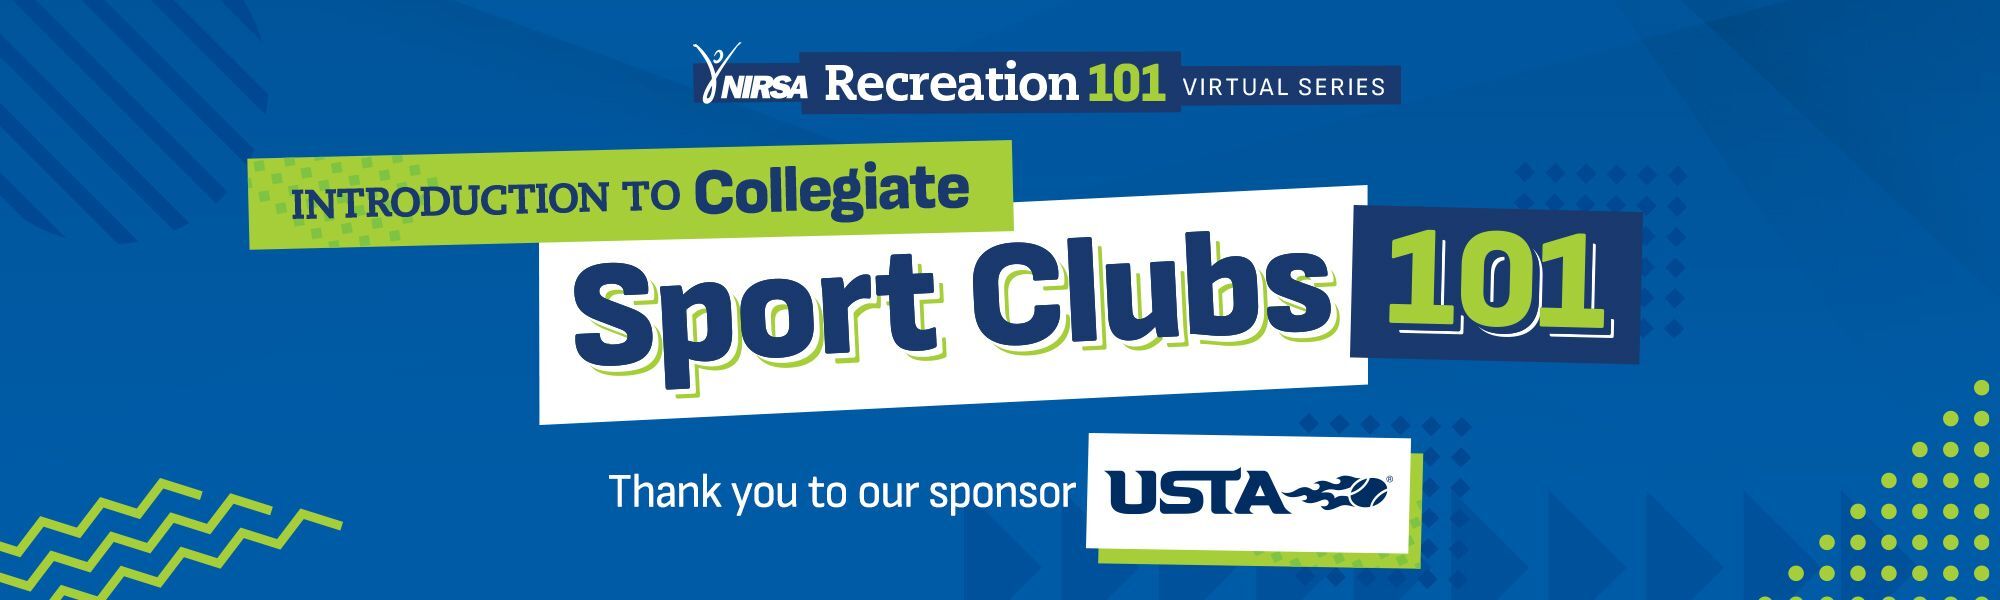 Introduction to Collegiate Sport Clubs 101